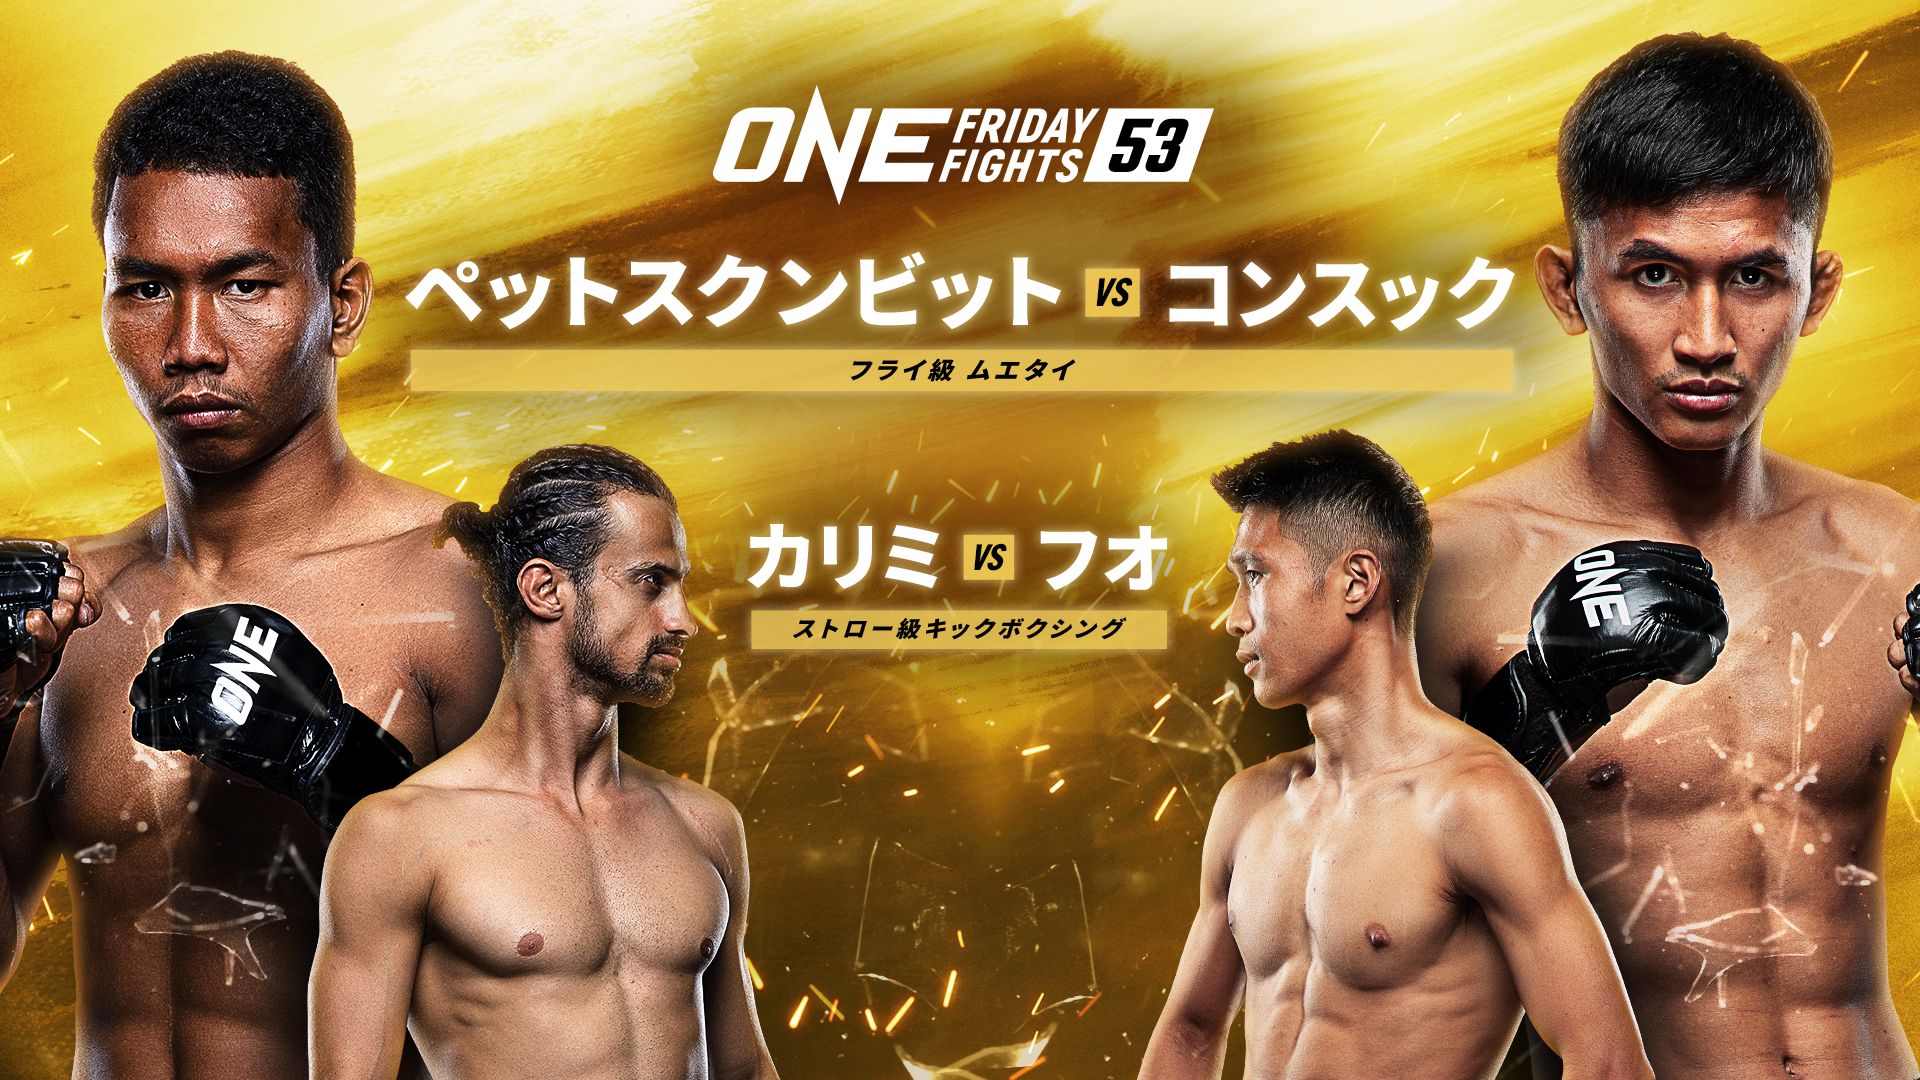 ONE Friday Fights 53